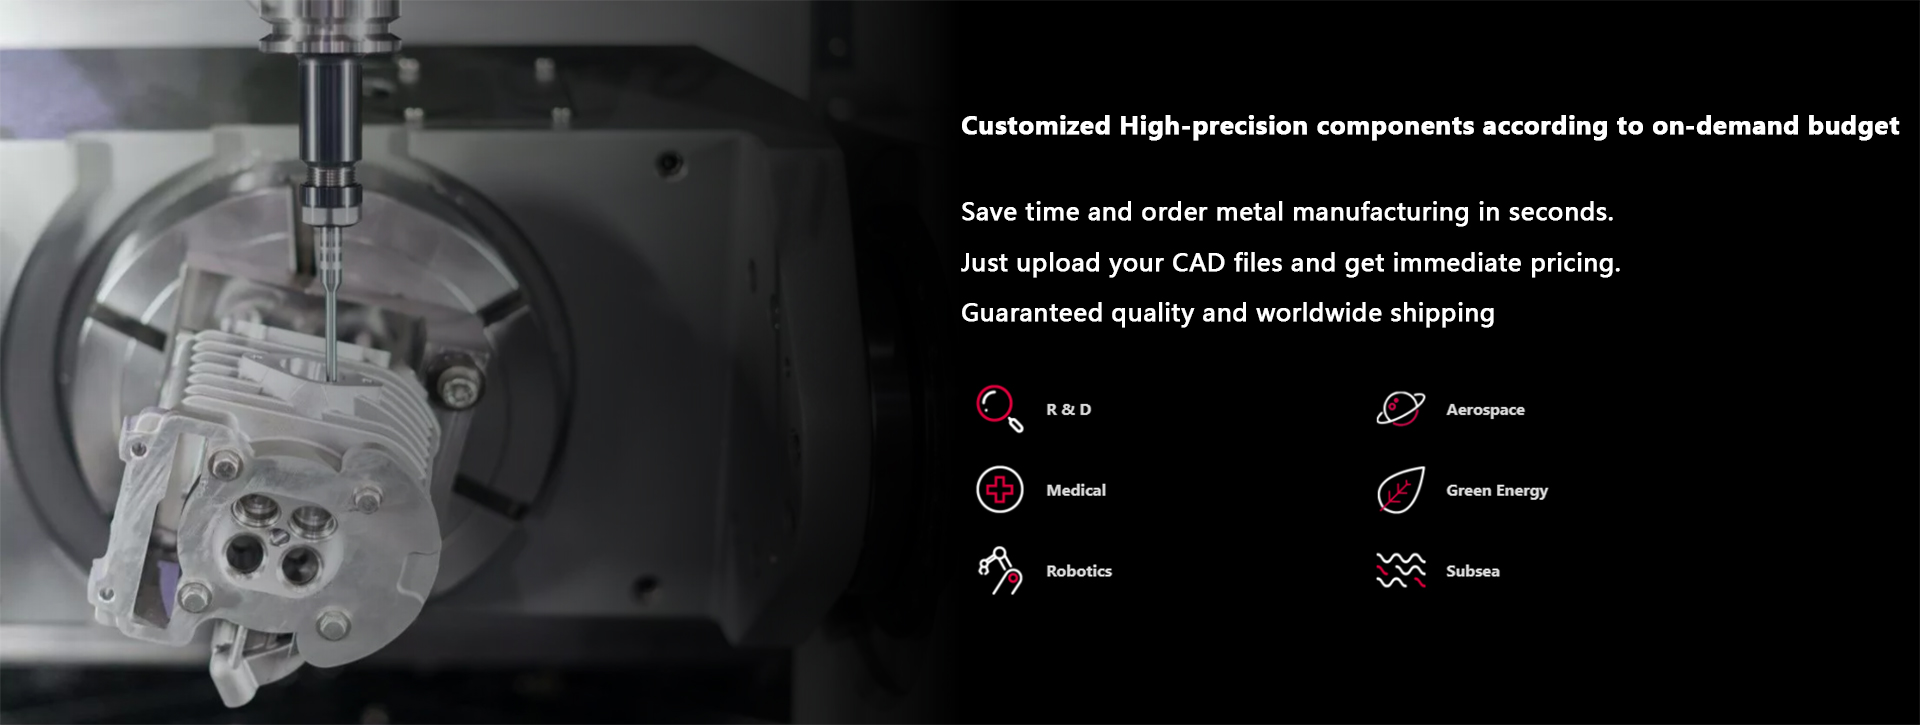 customized High Precision Asseblies & Parts Manufacturing according to on-demand budget